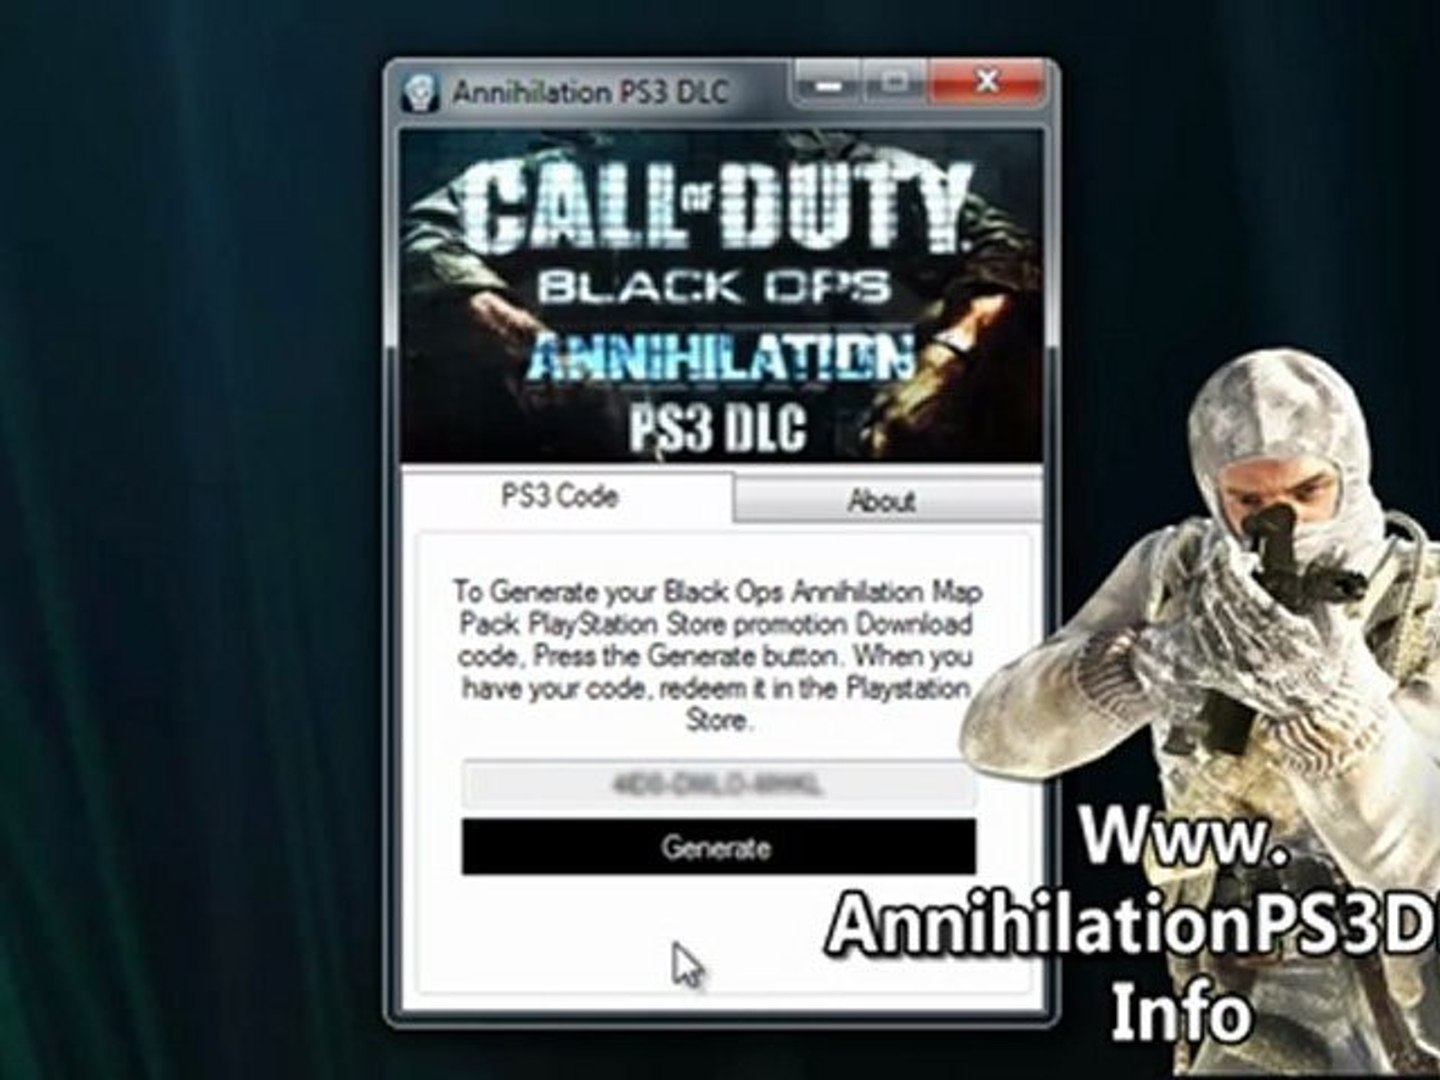 Get Free Black Ops Annihilation Map pack PS3 DLC Code - video Dailymotion